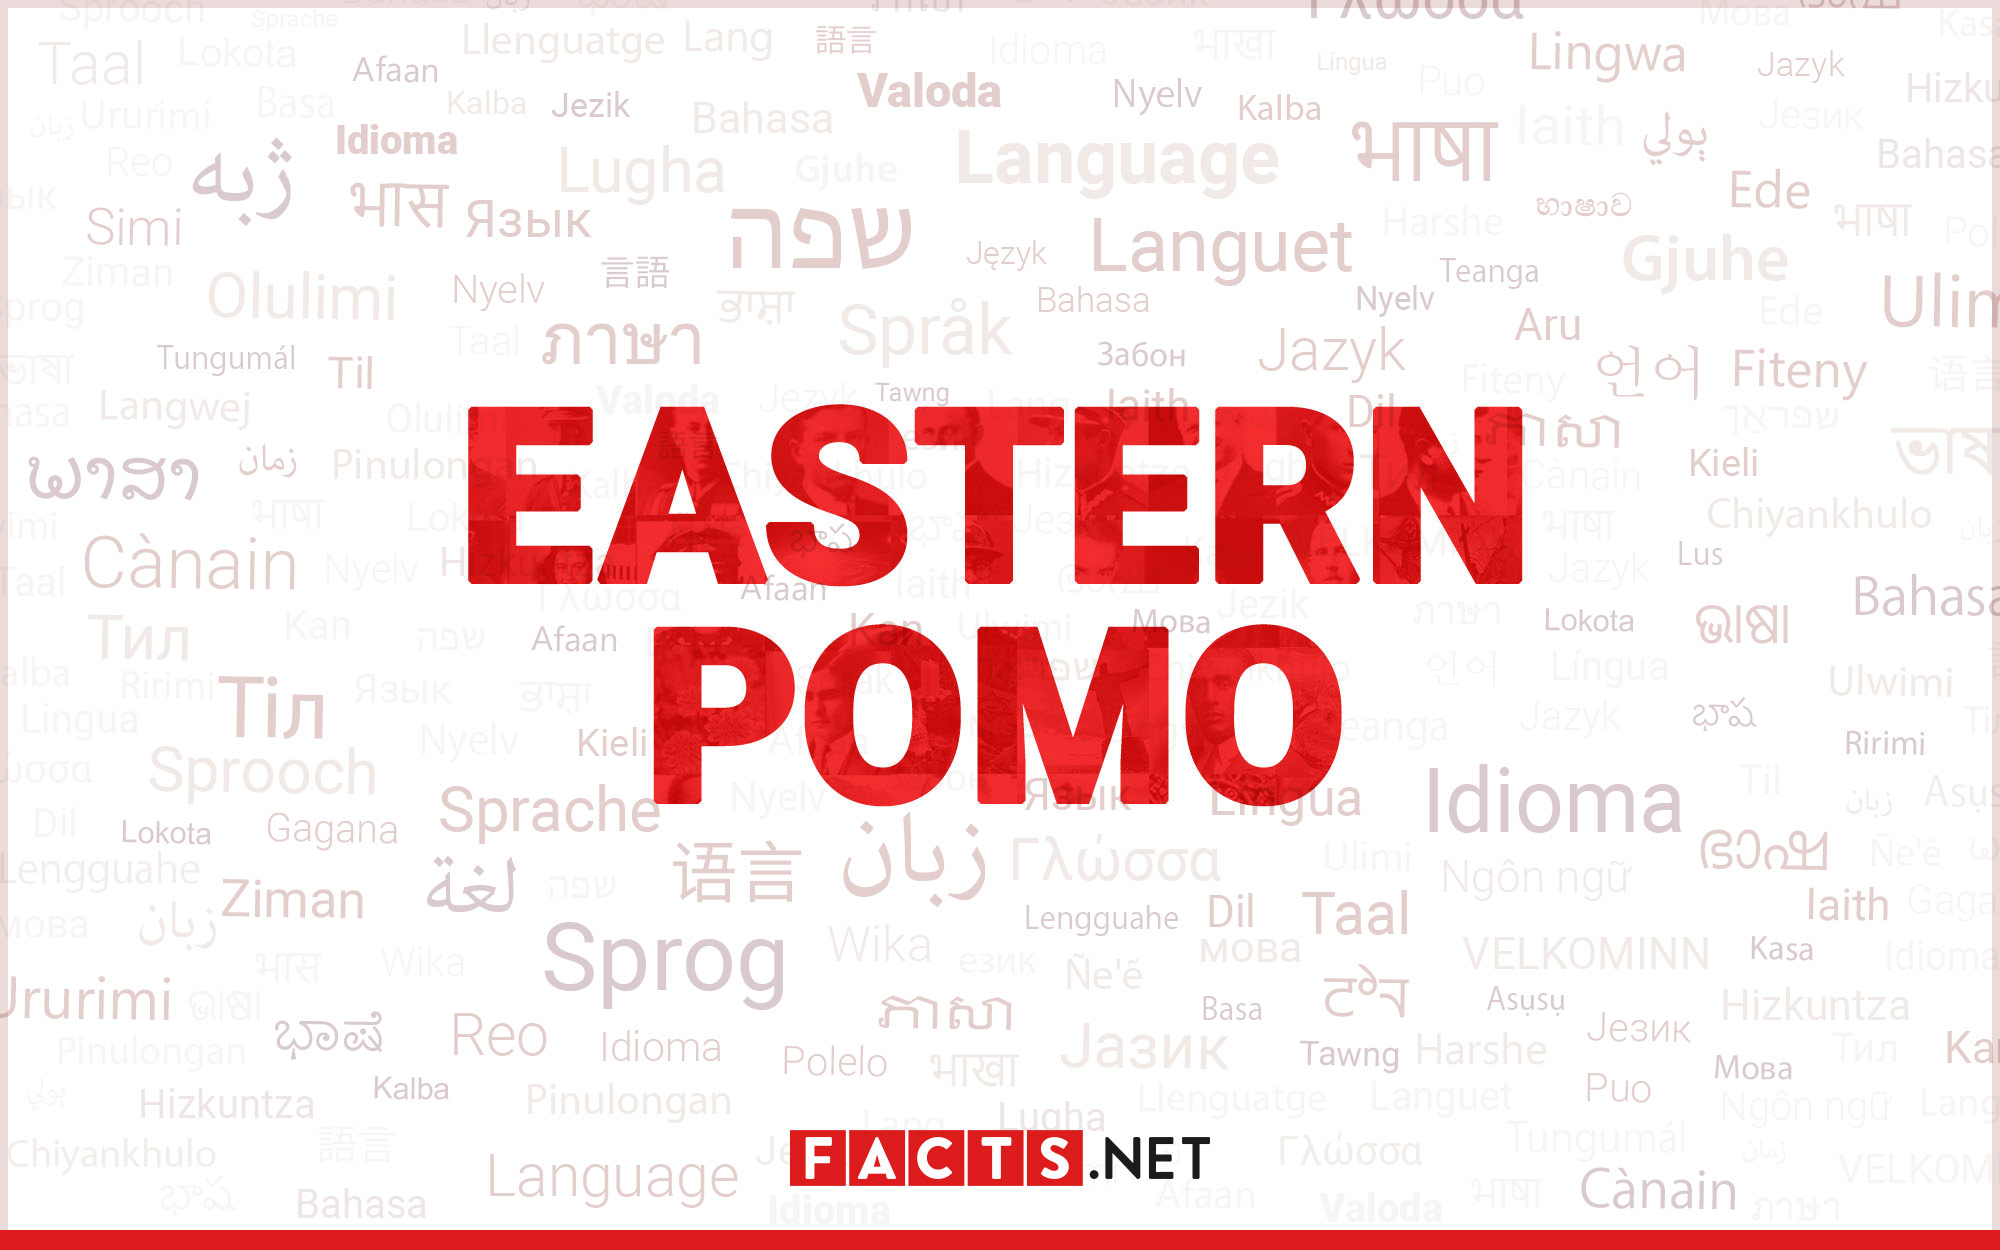 8-astounding-facts-about-eastern-pomo